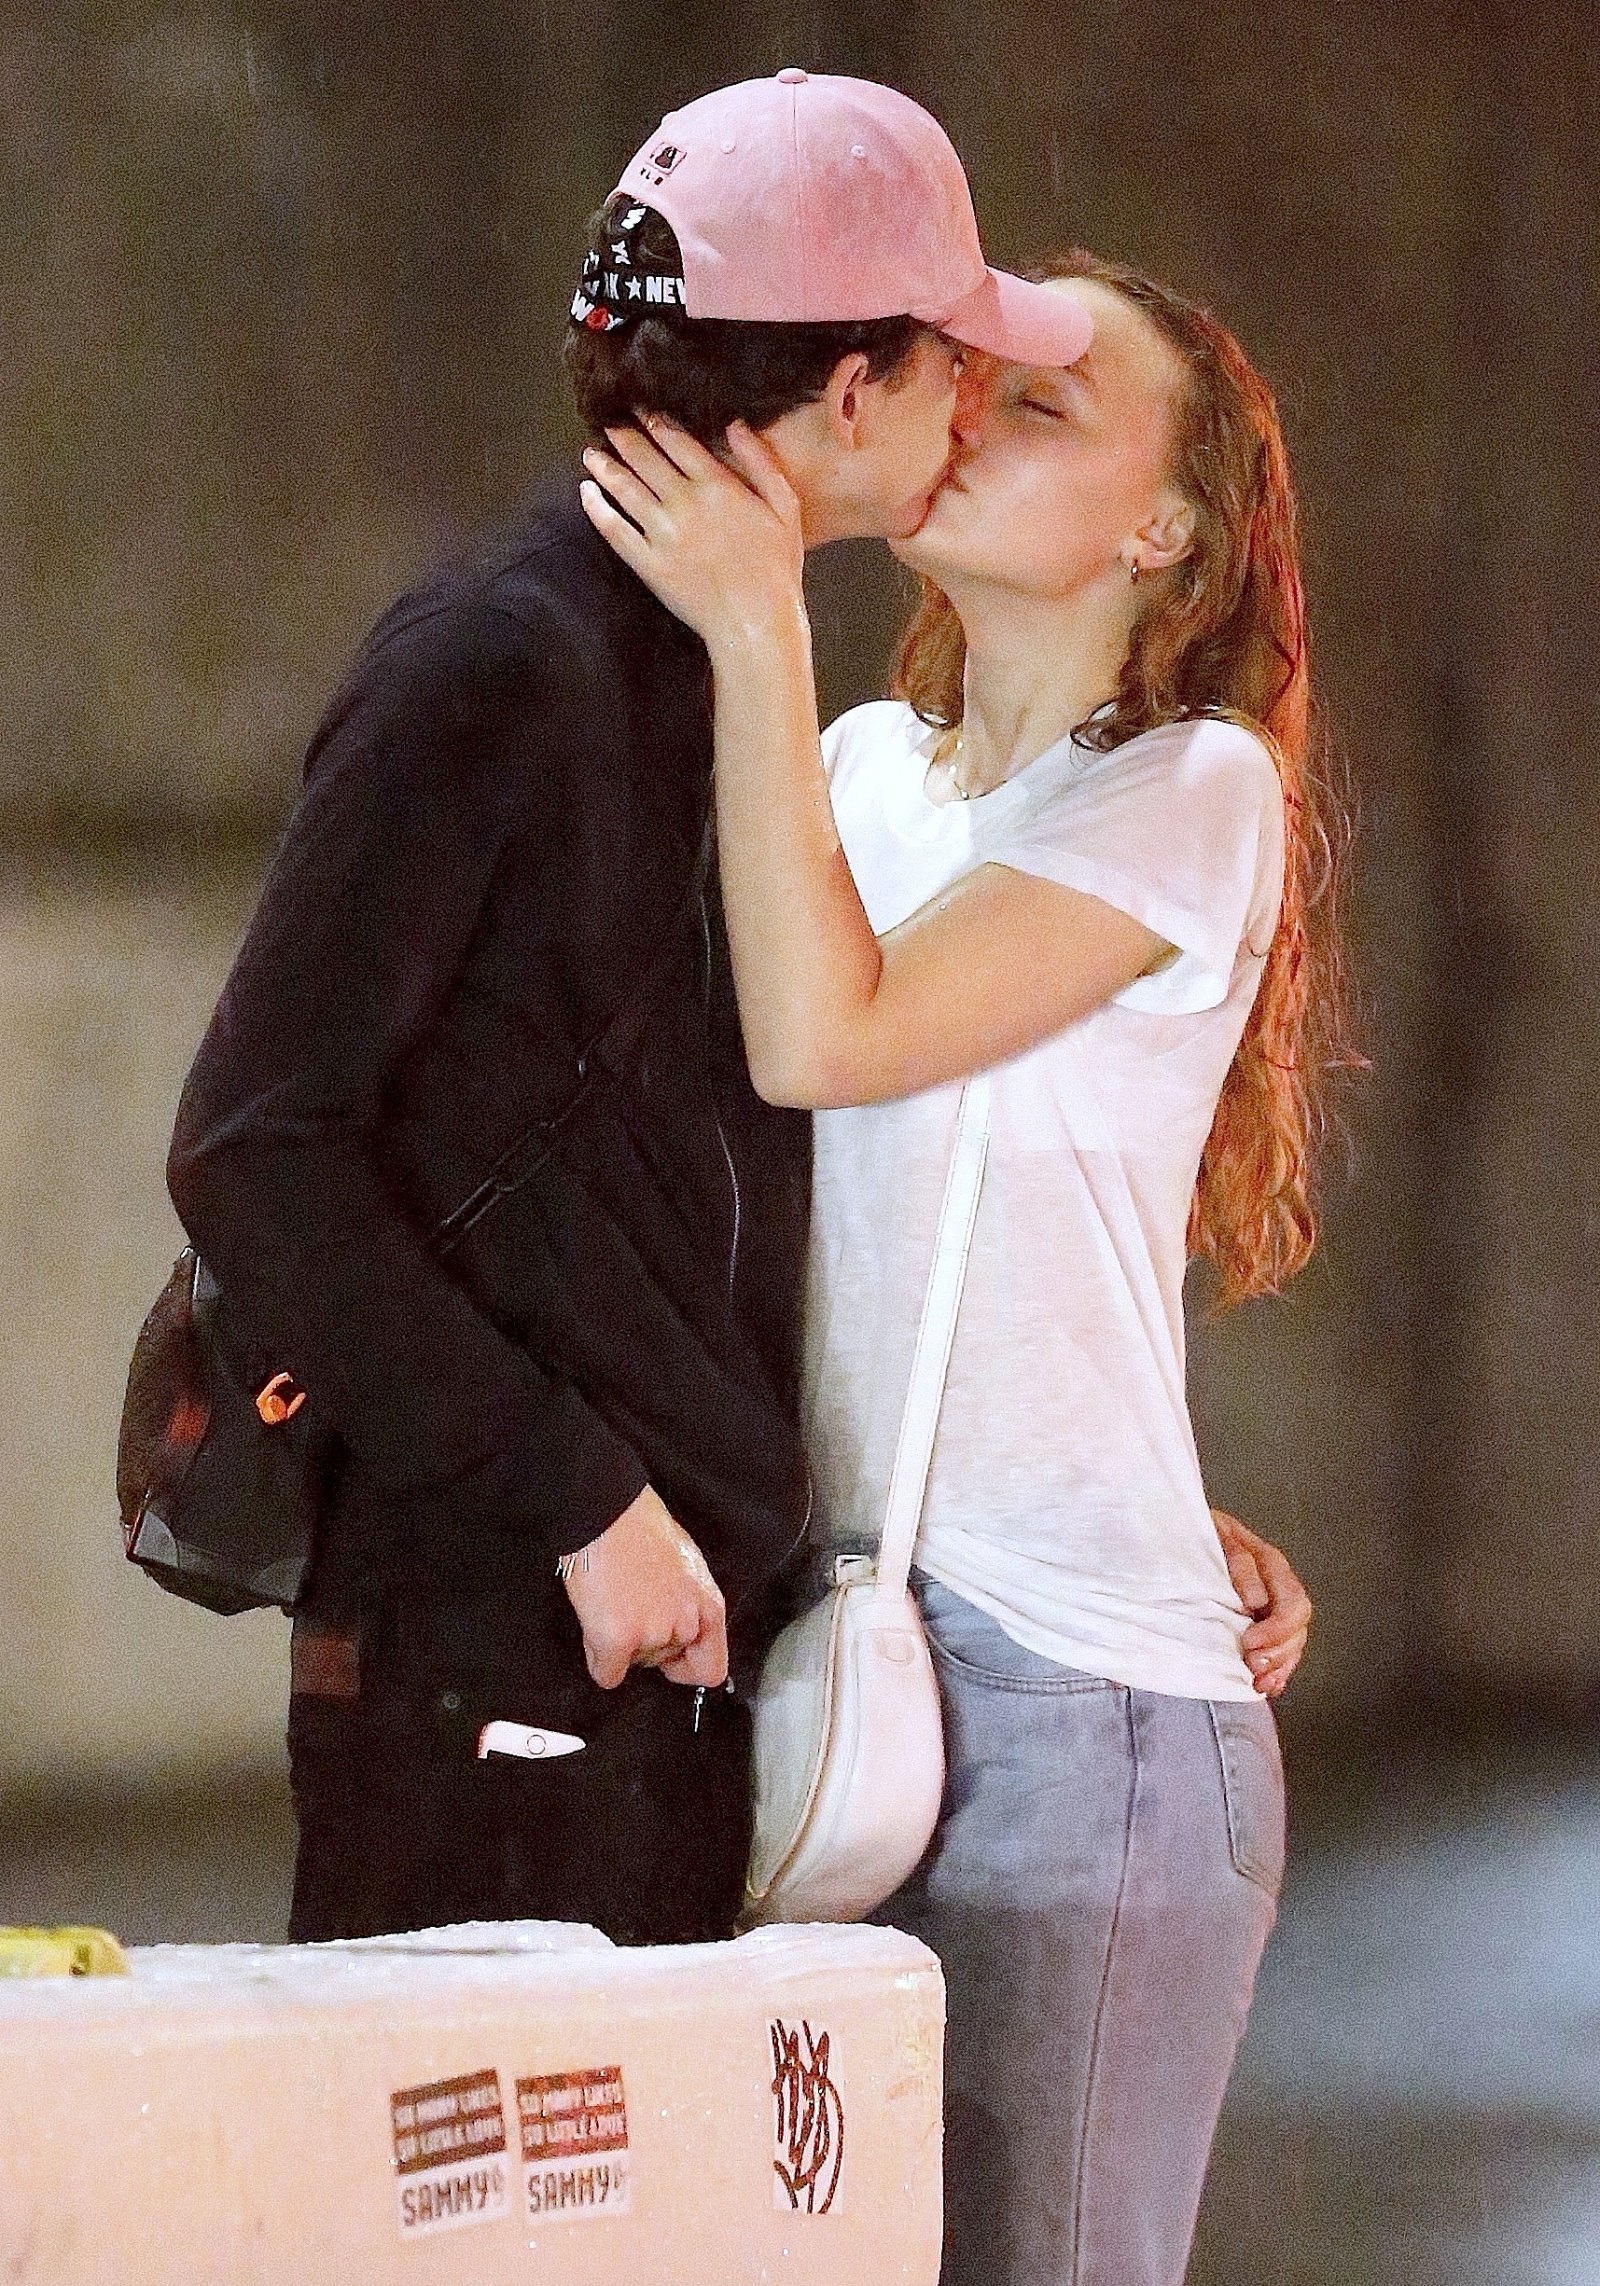 Lily-Rose Depp Timothee Chalamet Share A Kiss